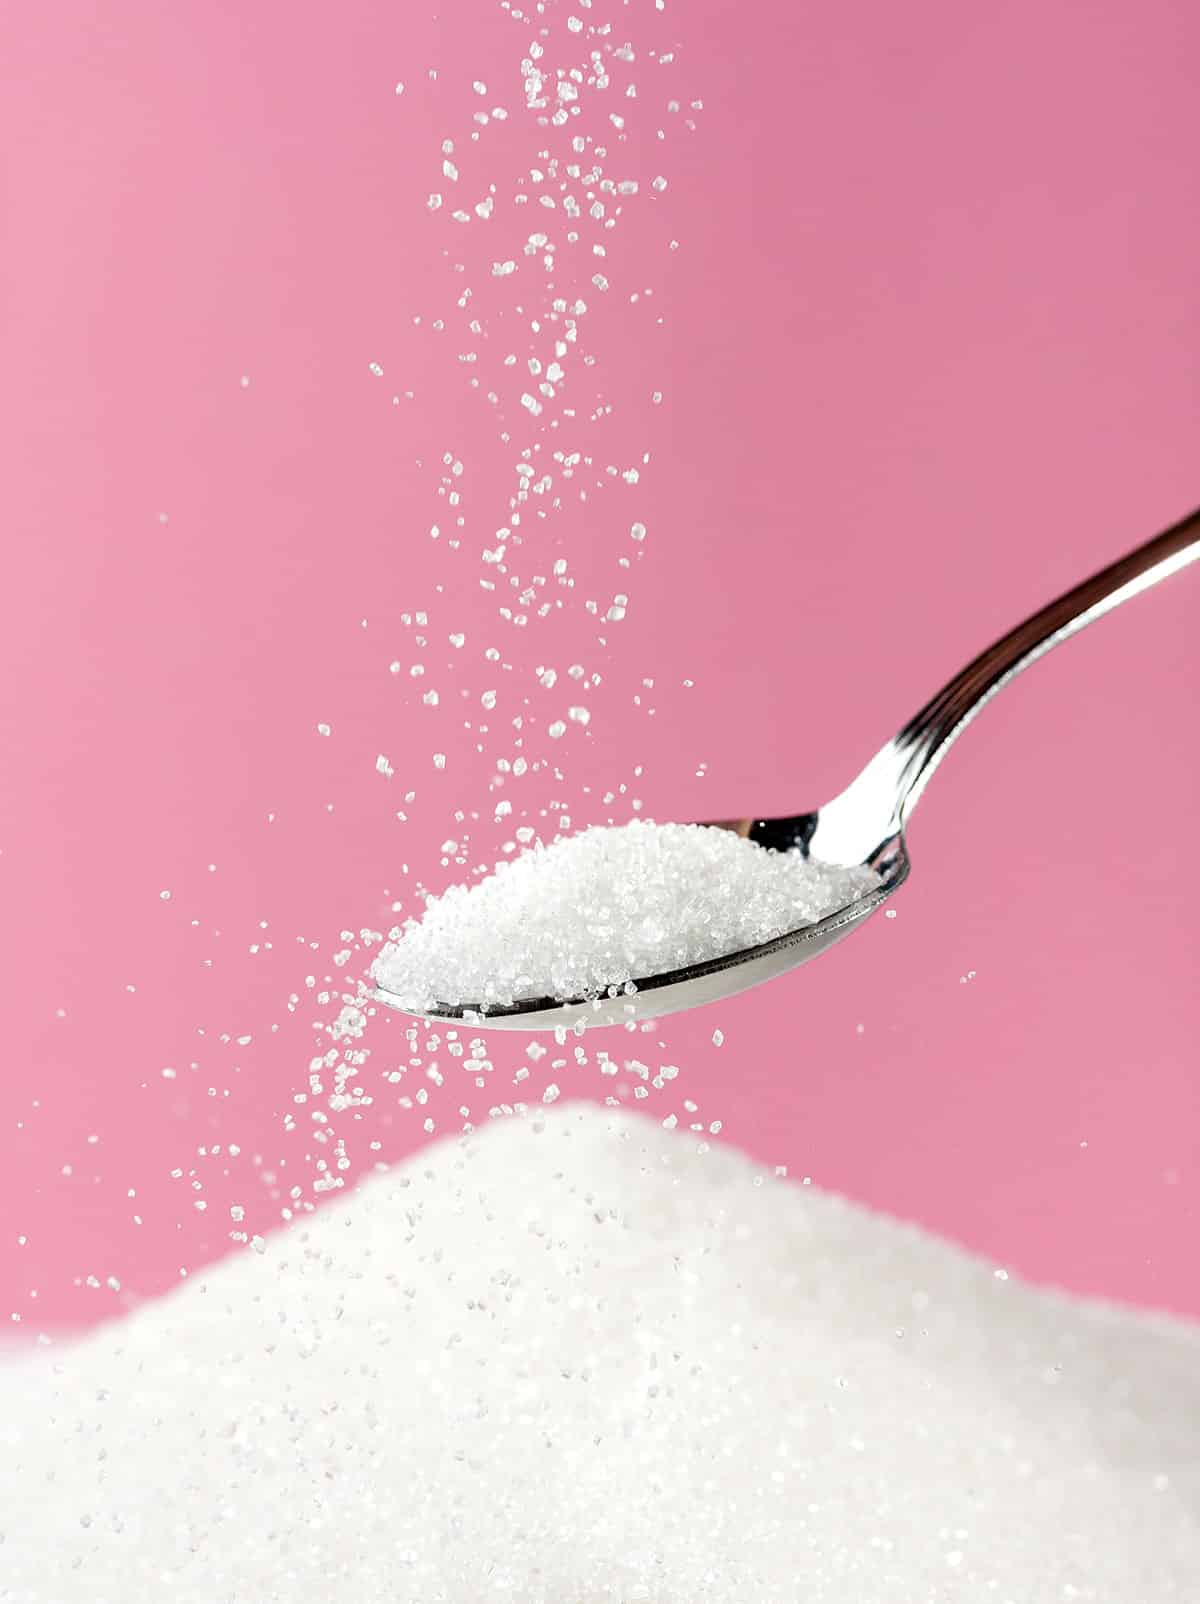 Sugar being poured onto spoon.